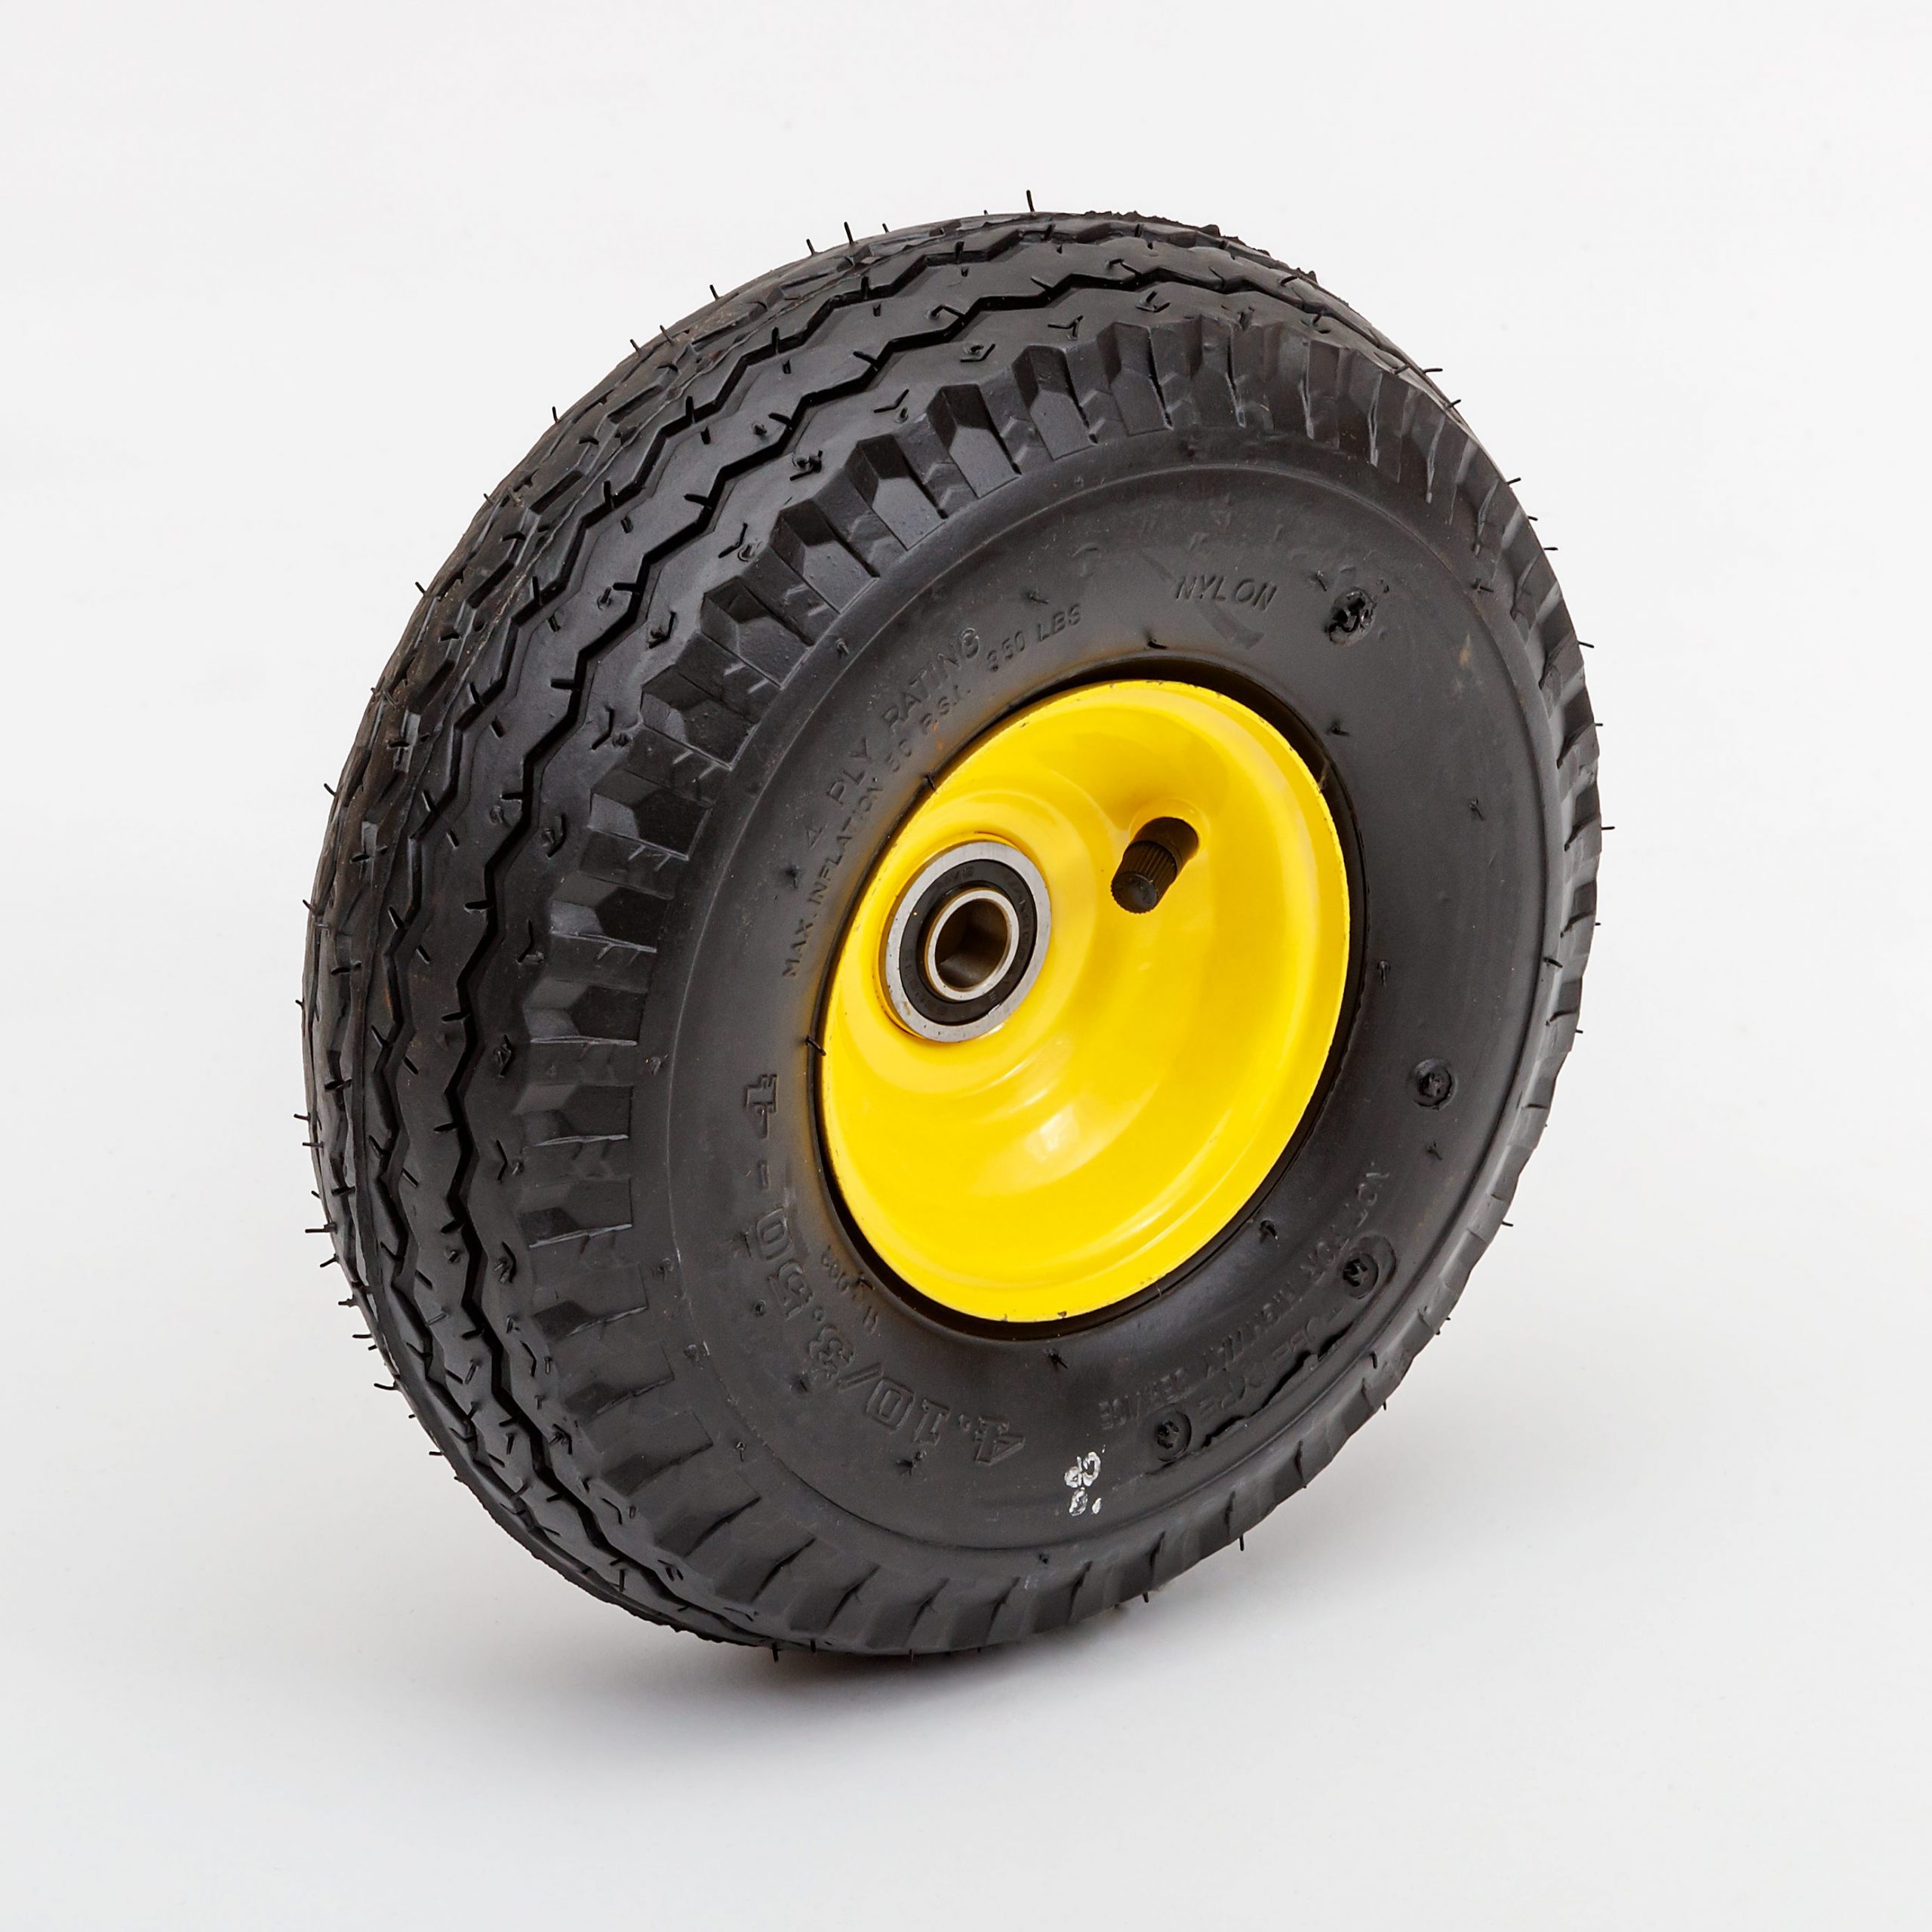 Wagon/Tricycle/Utility cart Replacement Lapp Wheels 15 Pneumatic Wheel White Turf 4 ply Tread